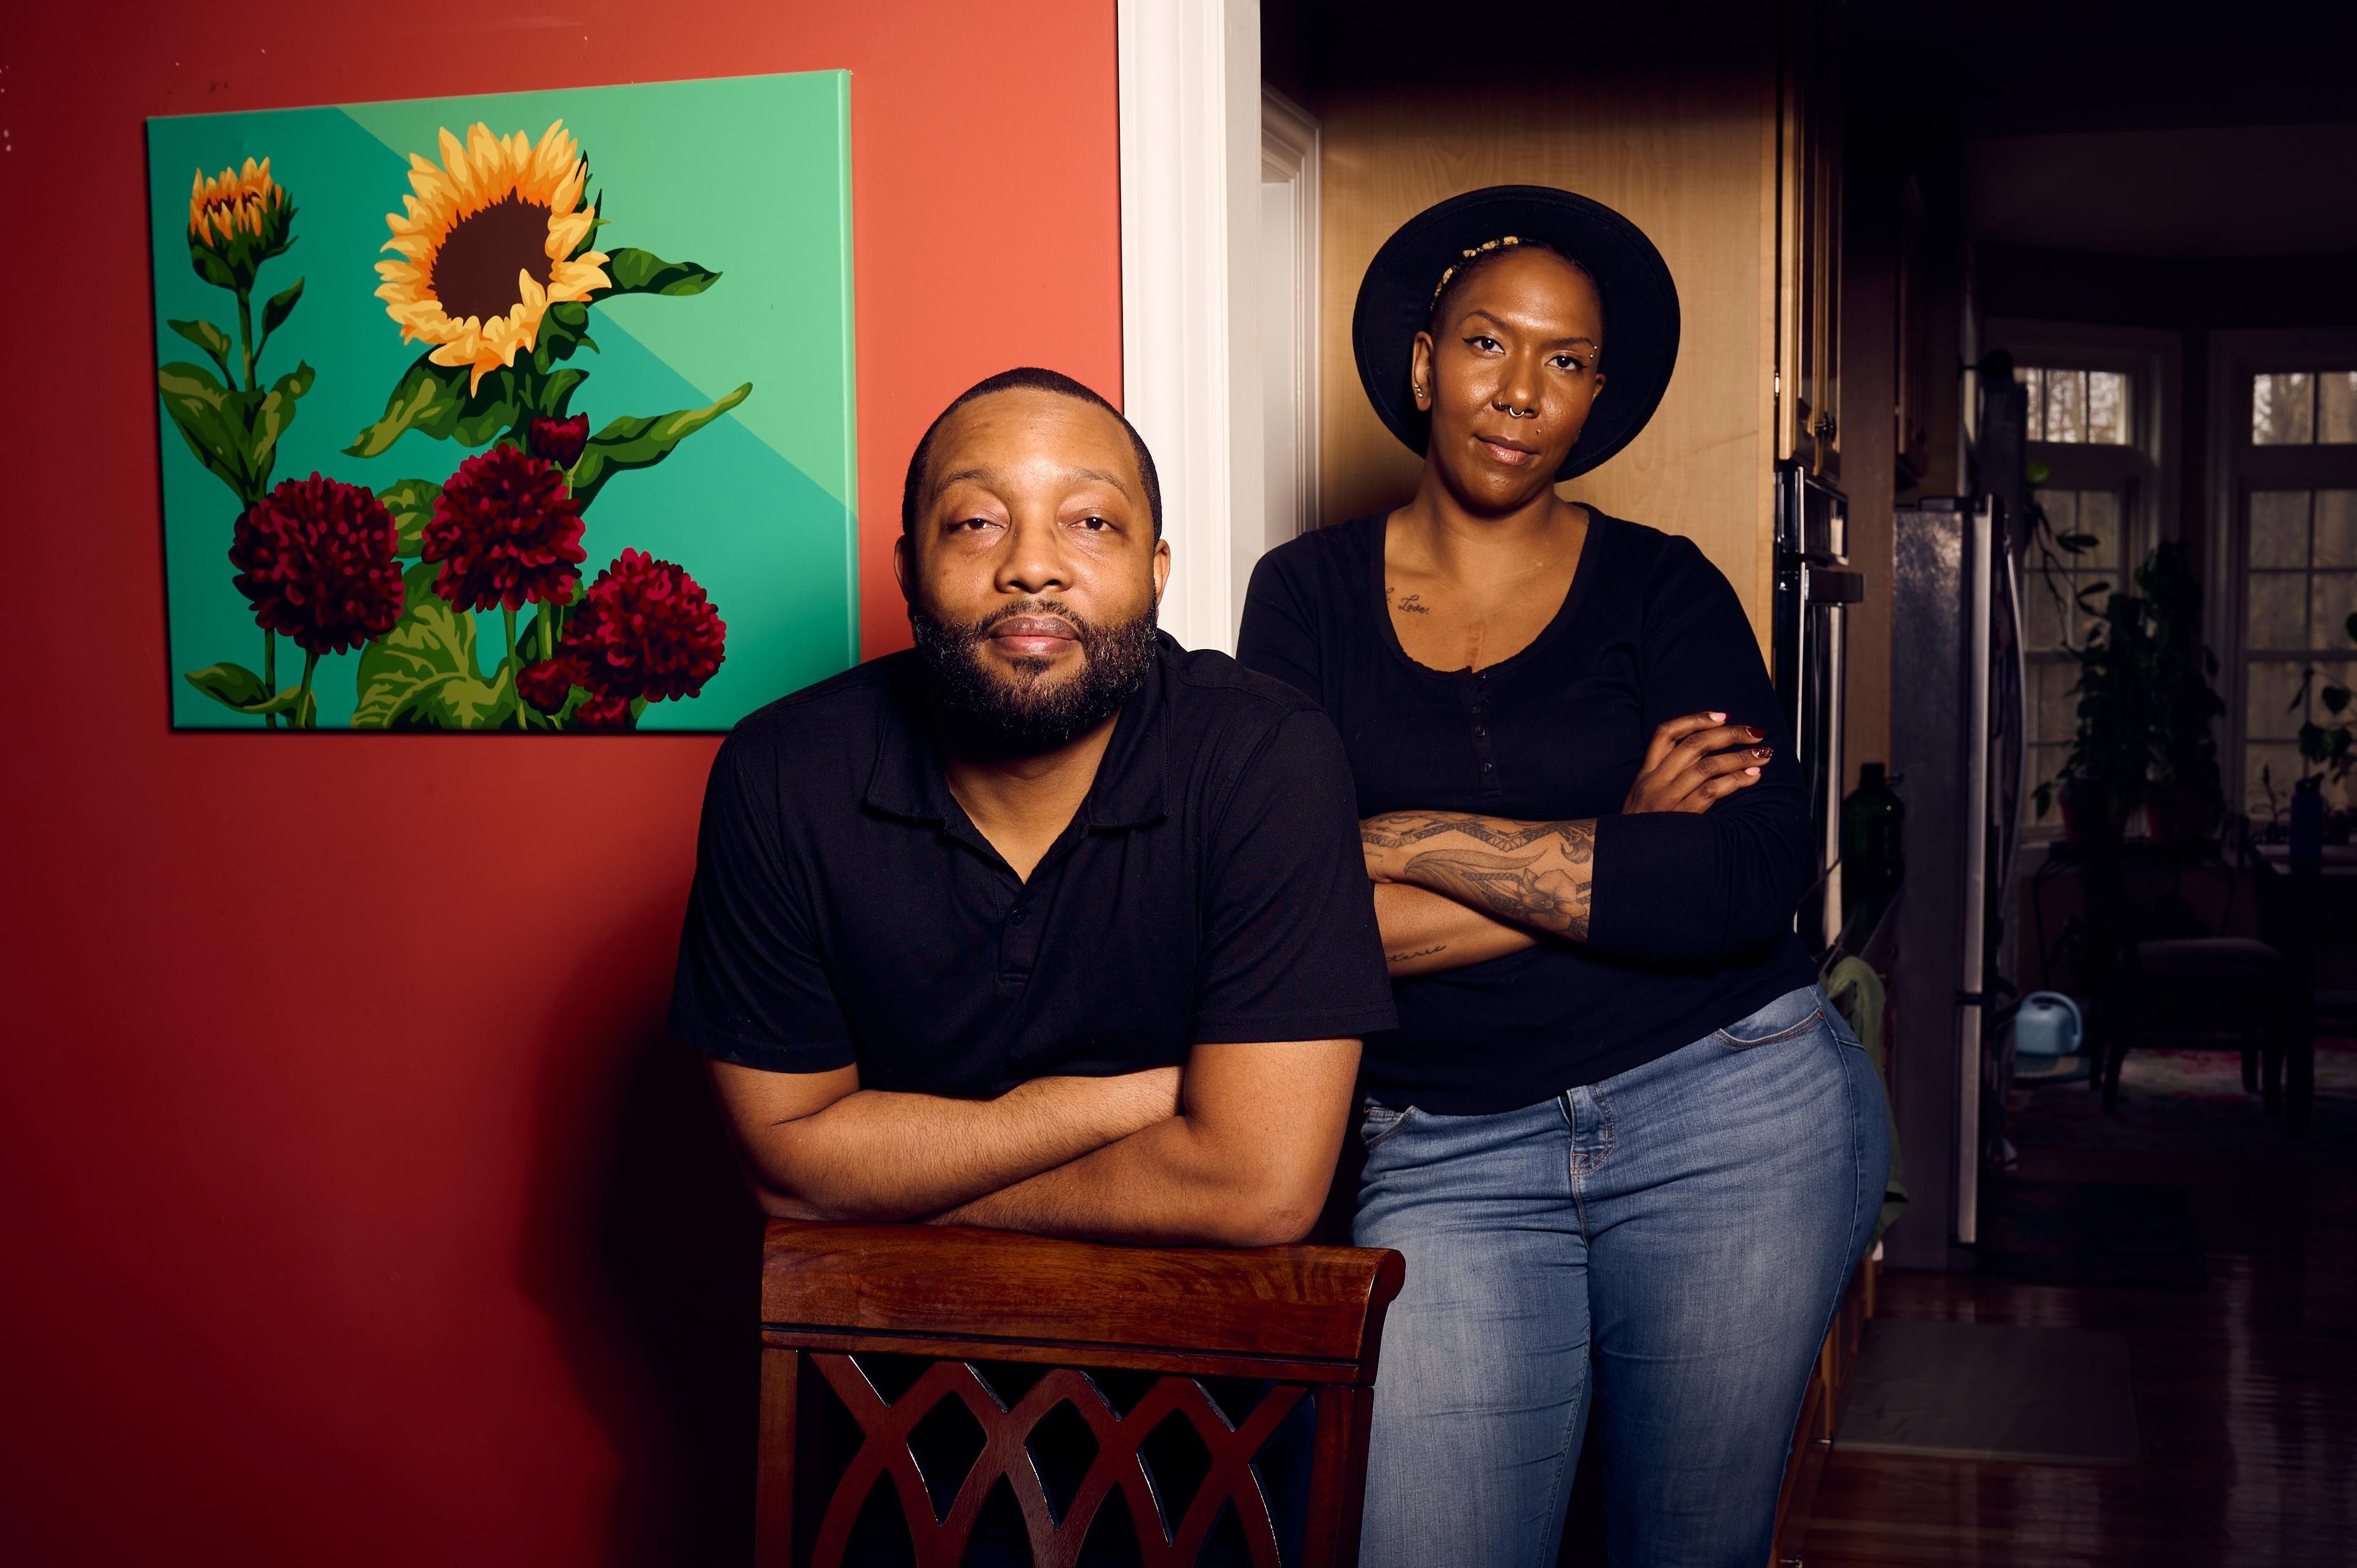 Dr. Jenn M. Jackson and Daren W. Jackson pose for a portrait in their home in Syracuse, New York.